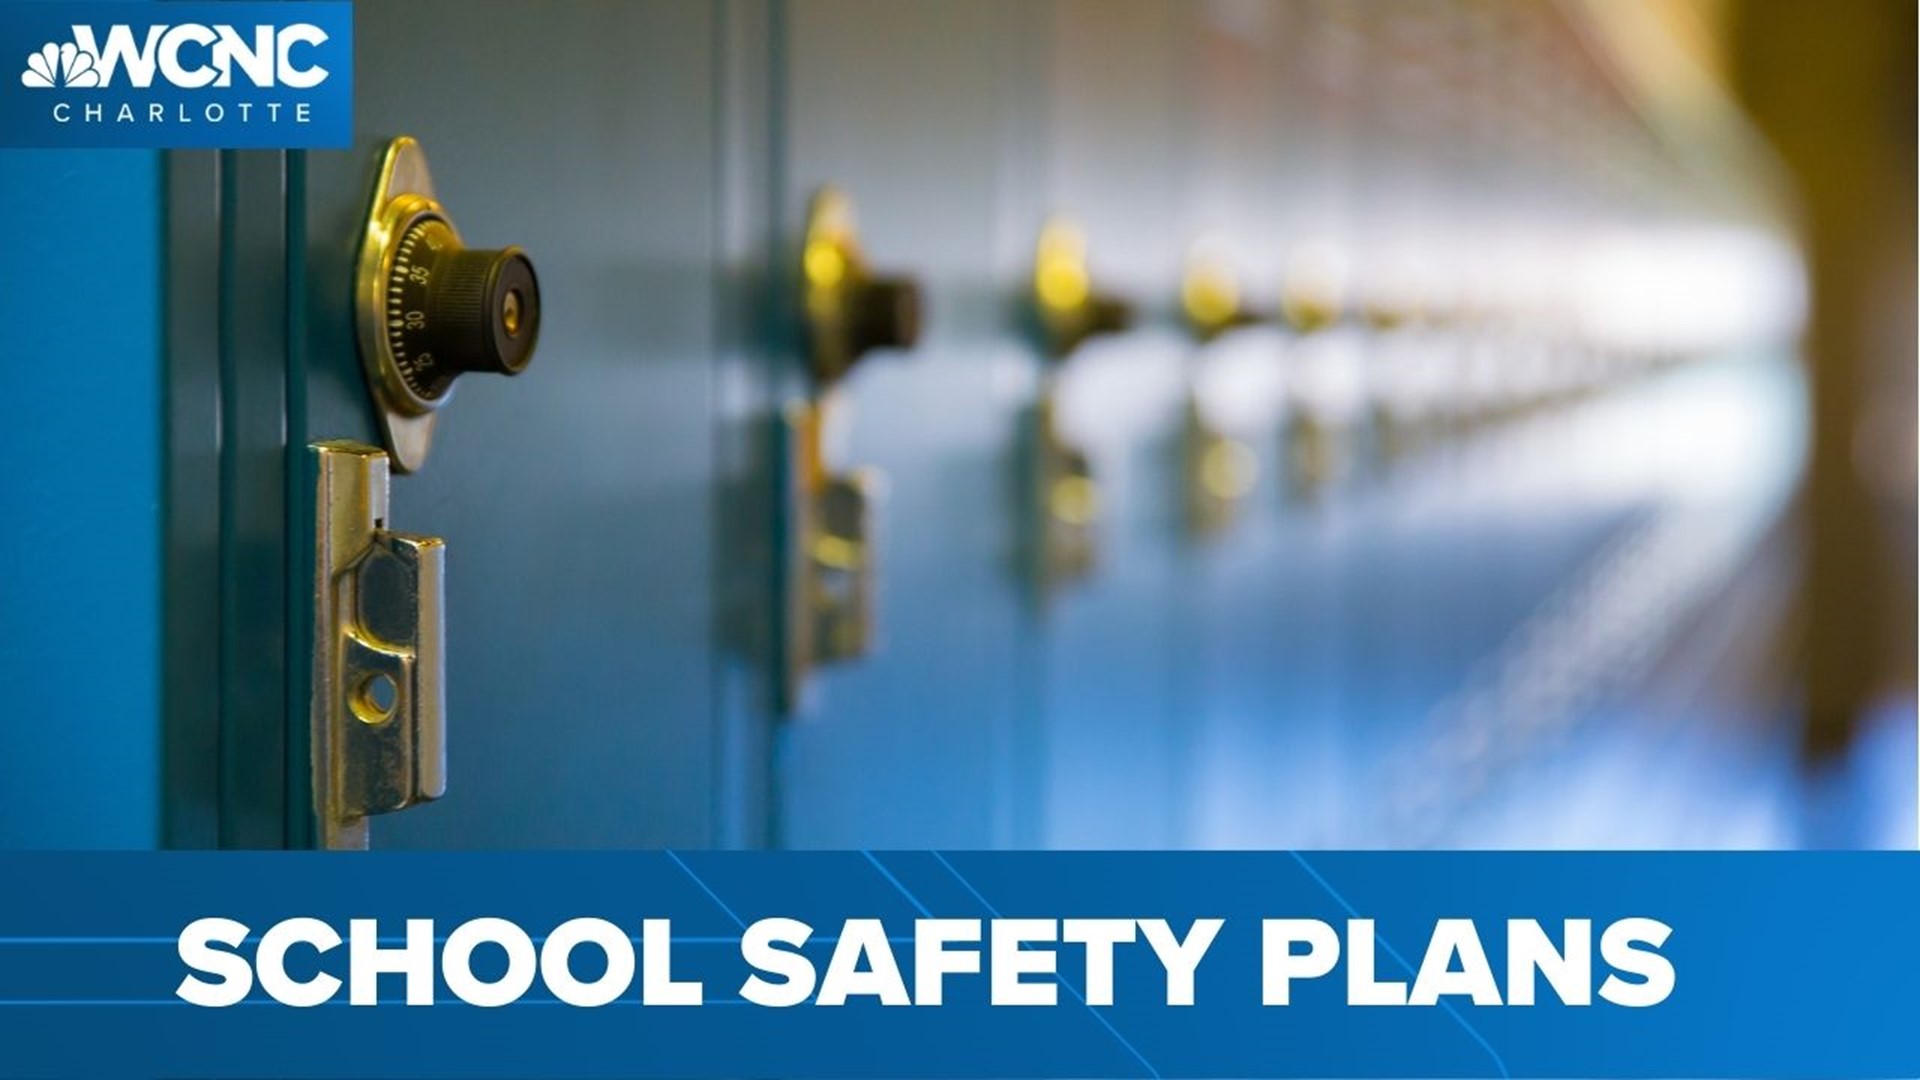 The Center for School Safety says an anonymous reporting app in a North Carolina school fielded more than 250 credible tips on planned school attacks.